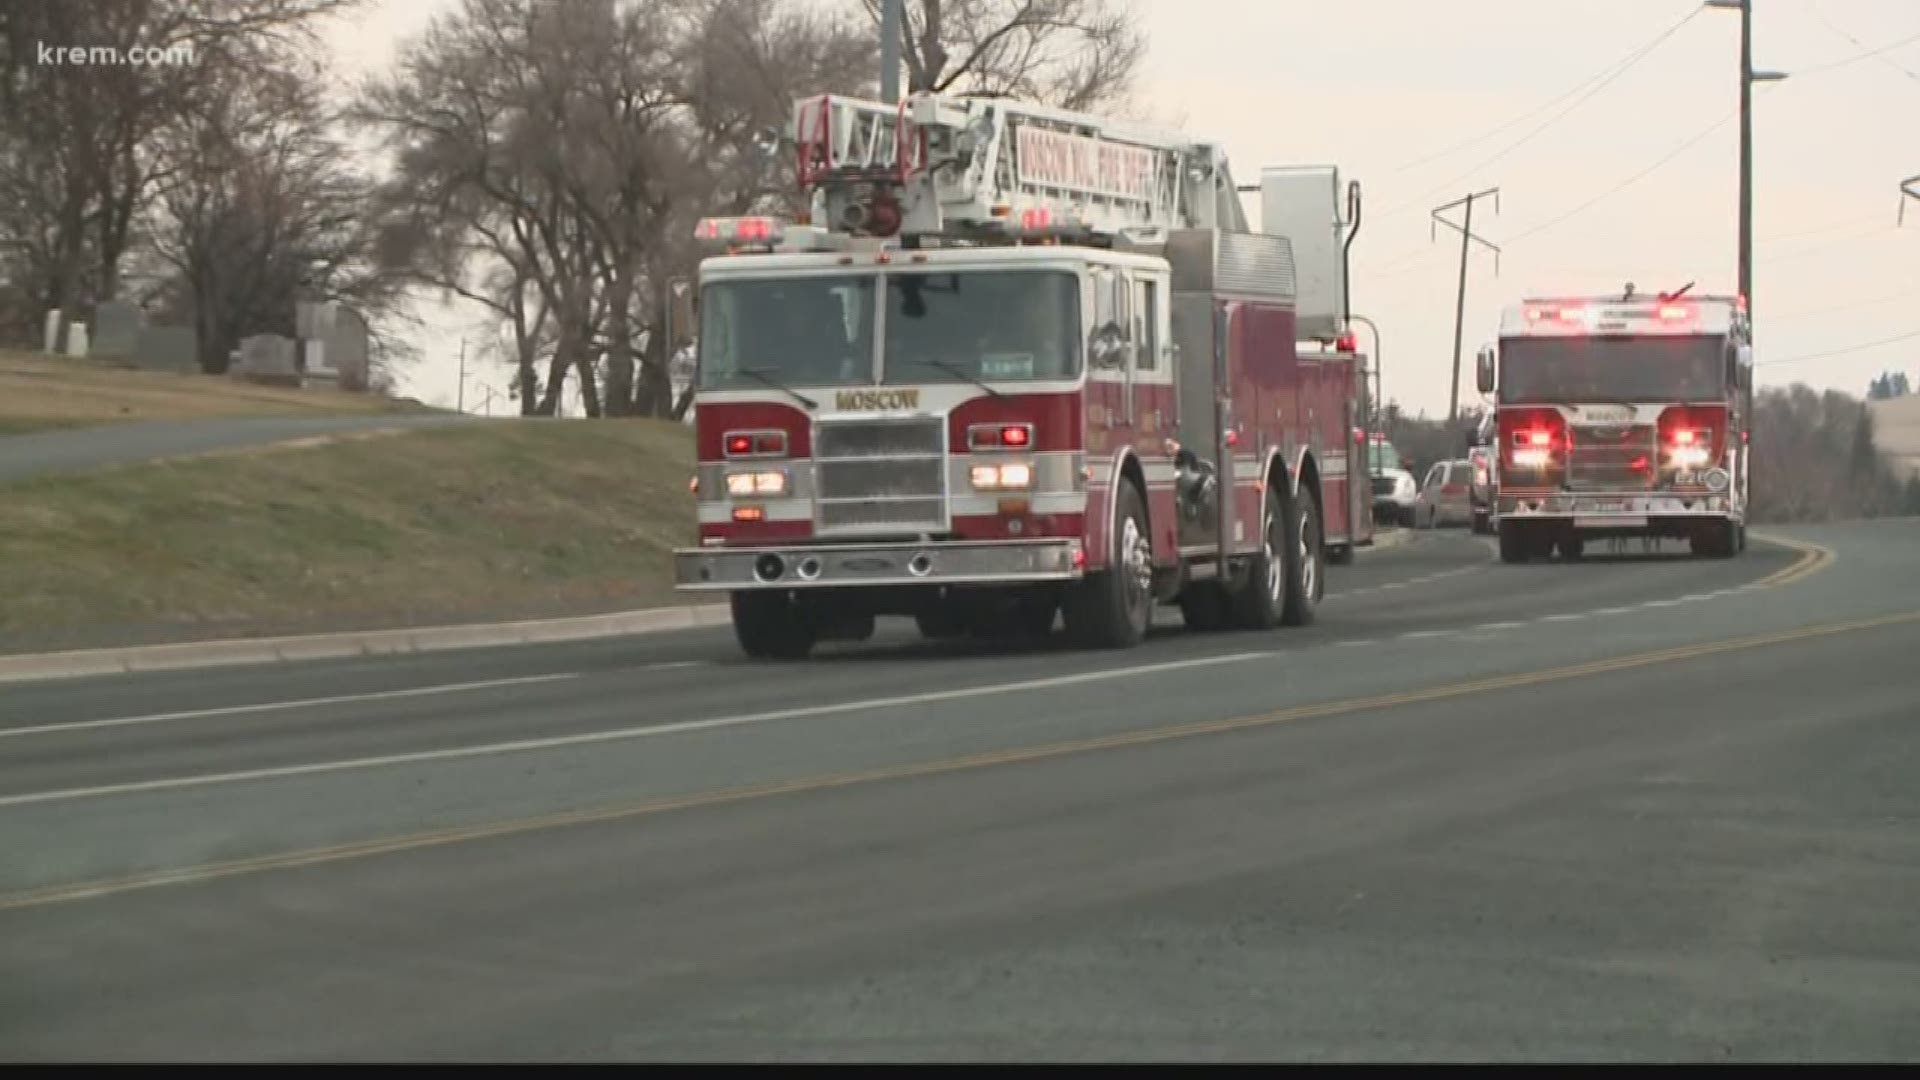 The Walla Walla County Fire Department held a procession to transport the remains of Ashton Farley on Friday.